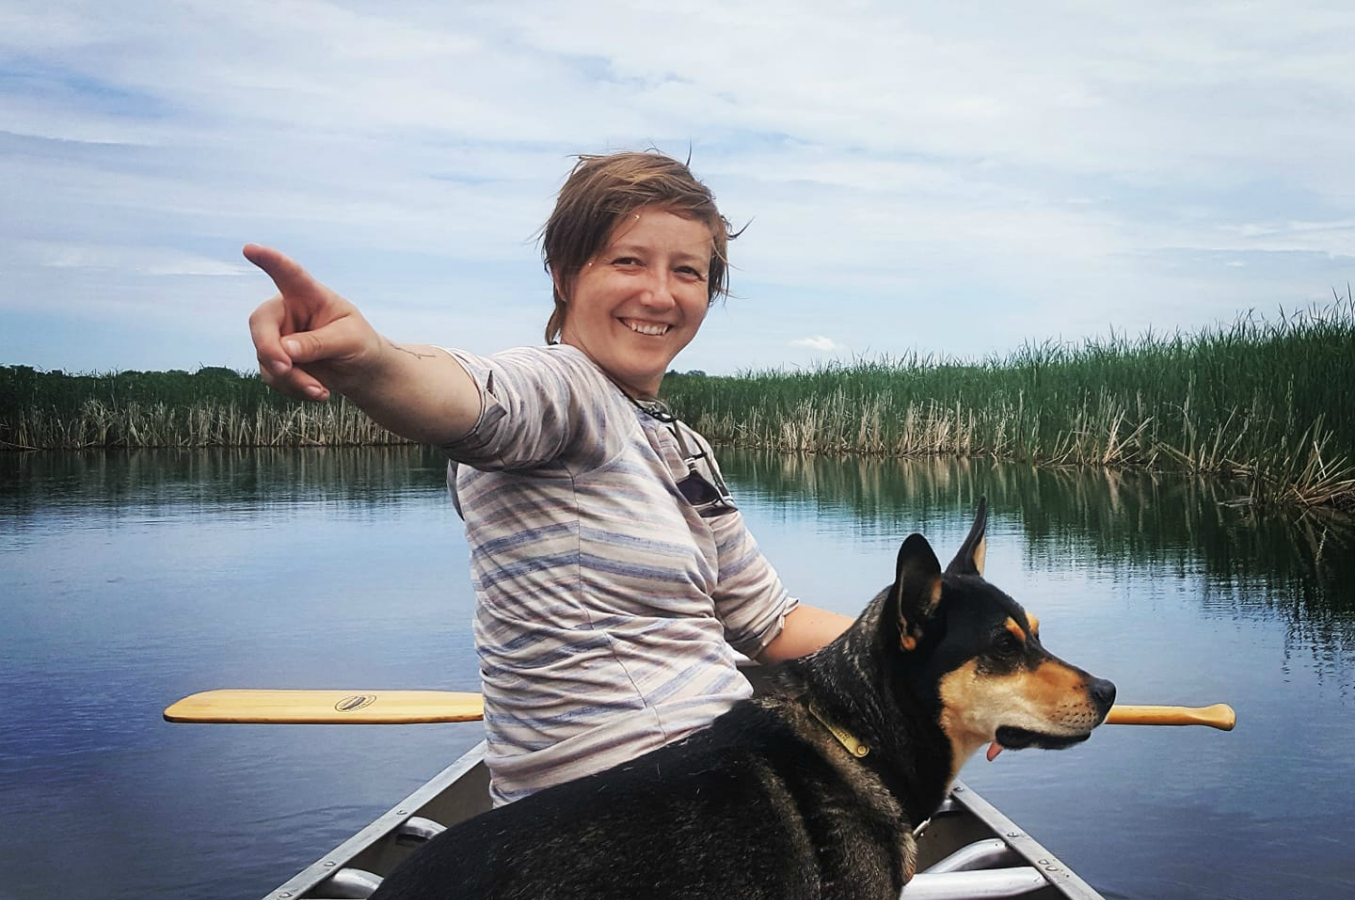 Siri sits in a canoe with a dog and points behind her smiling